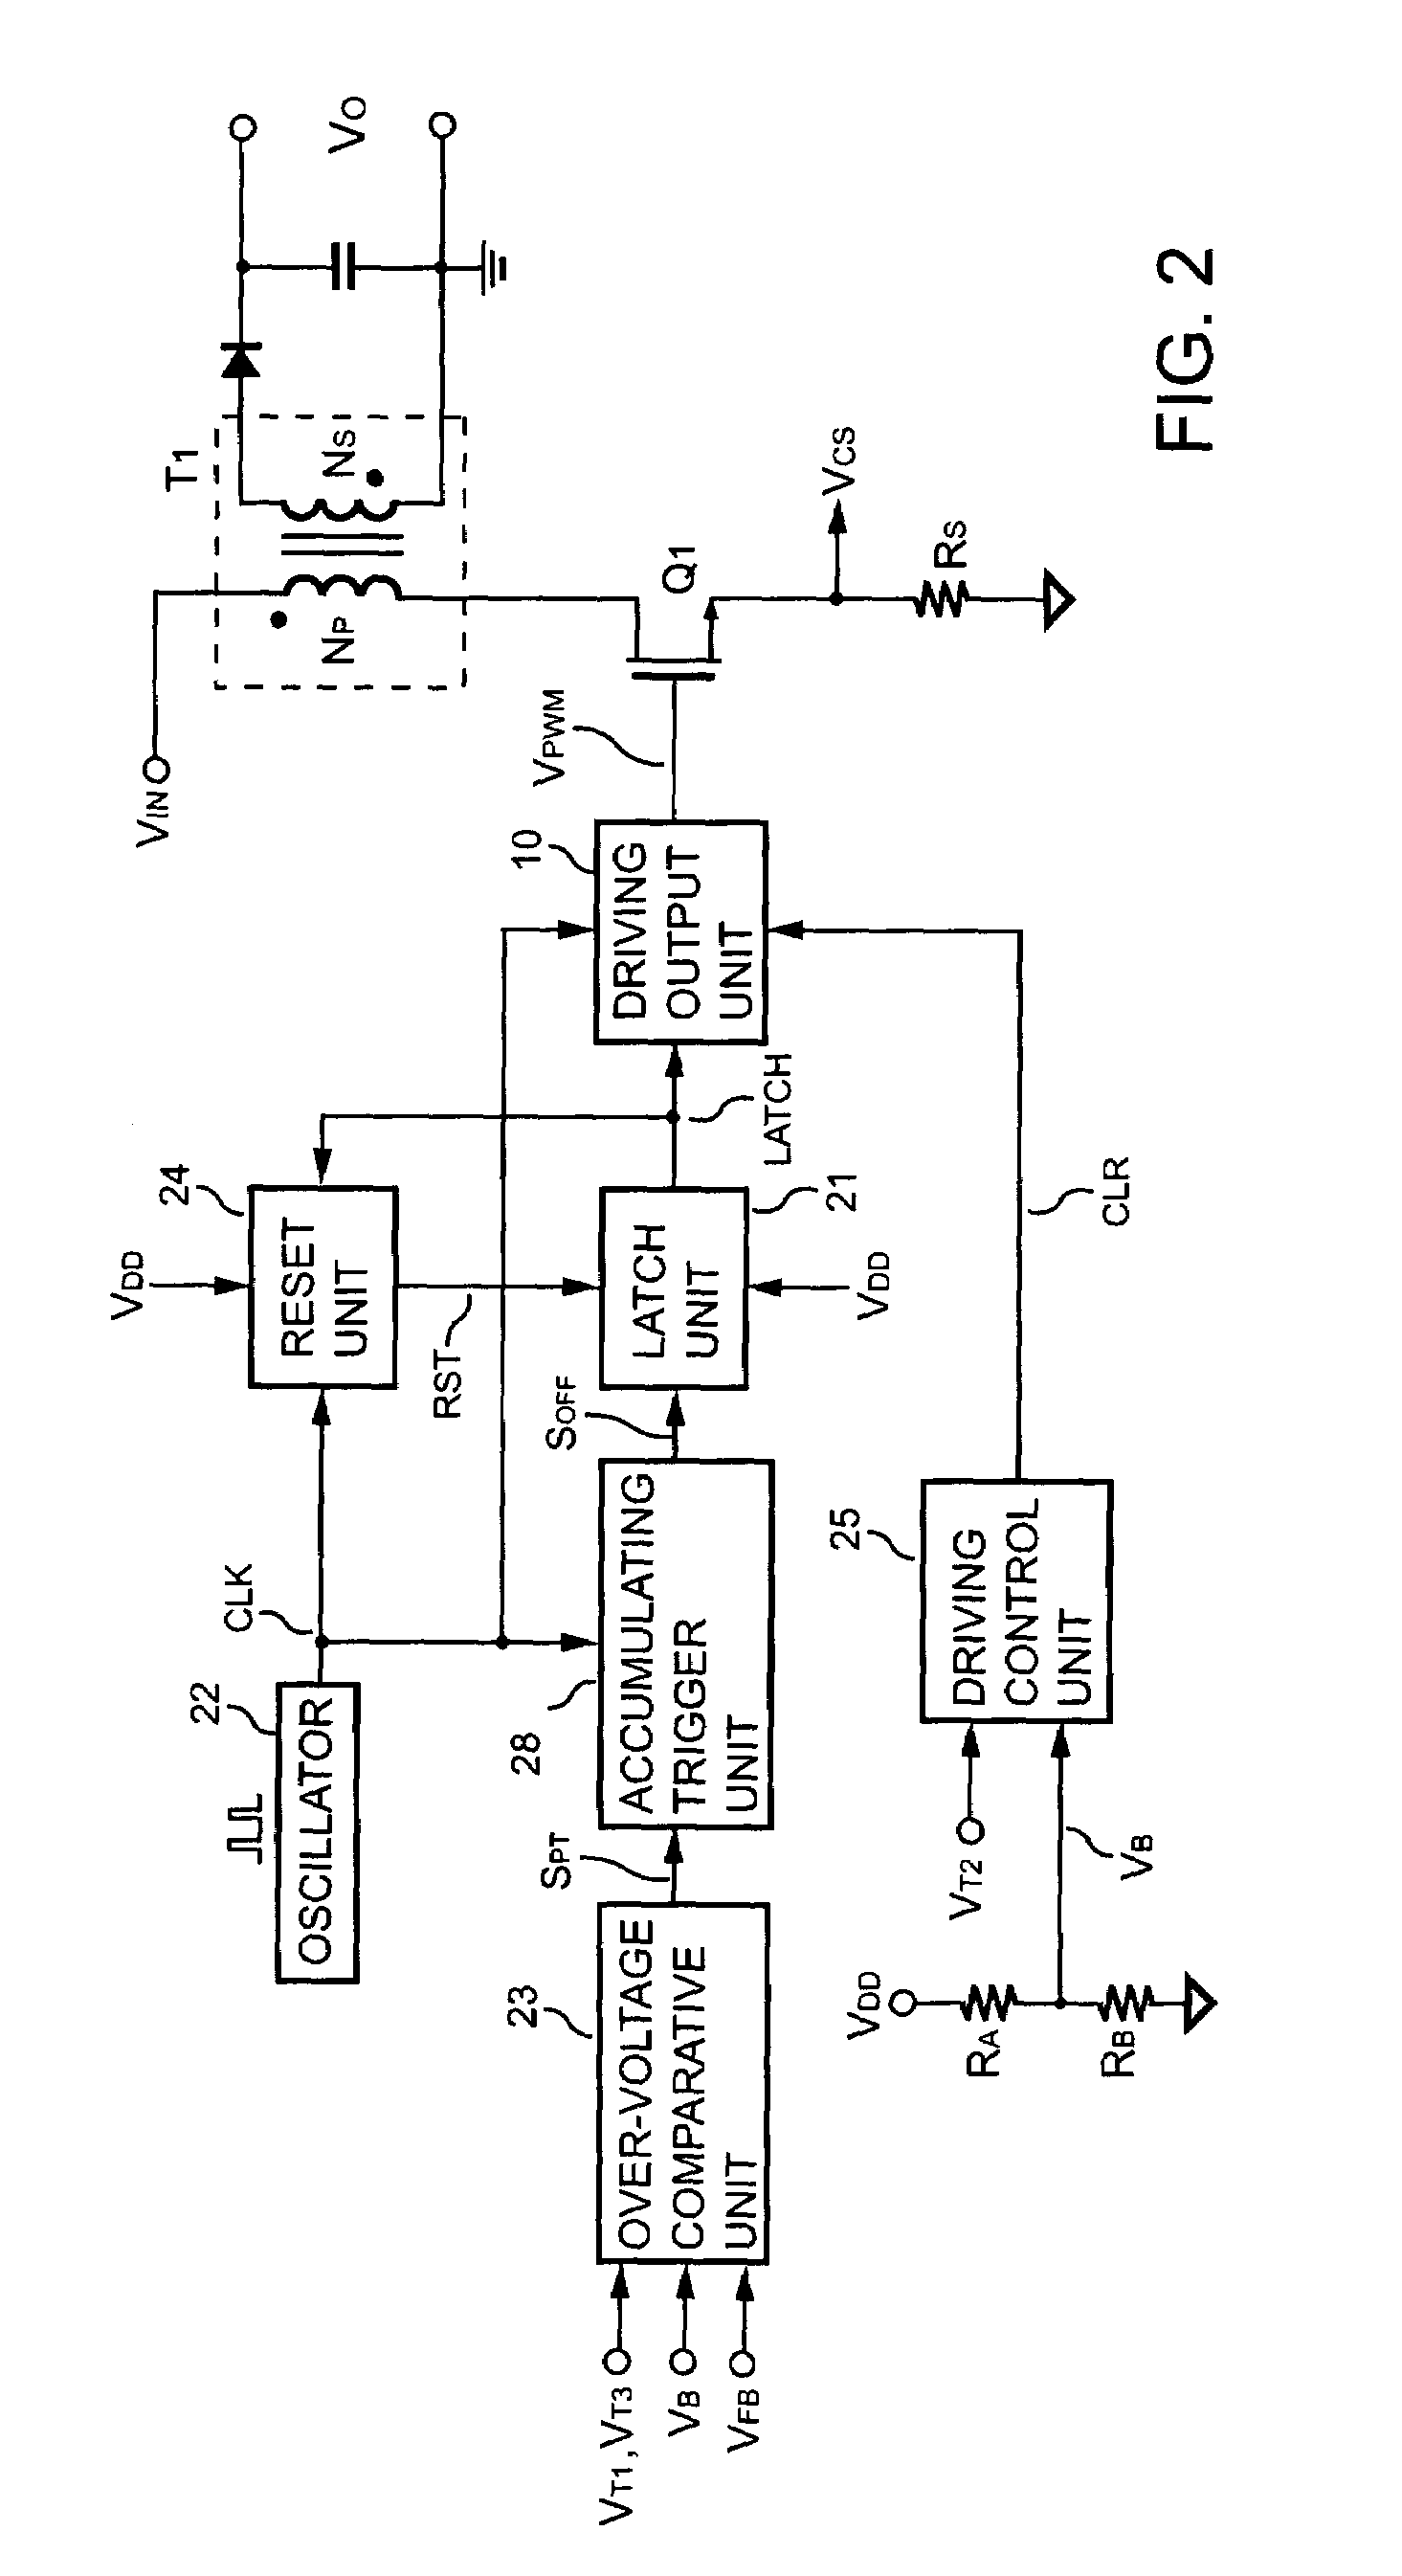 Over-voltage protection circuit for power converter